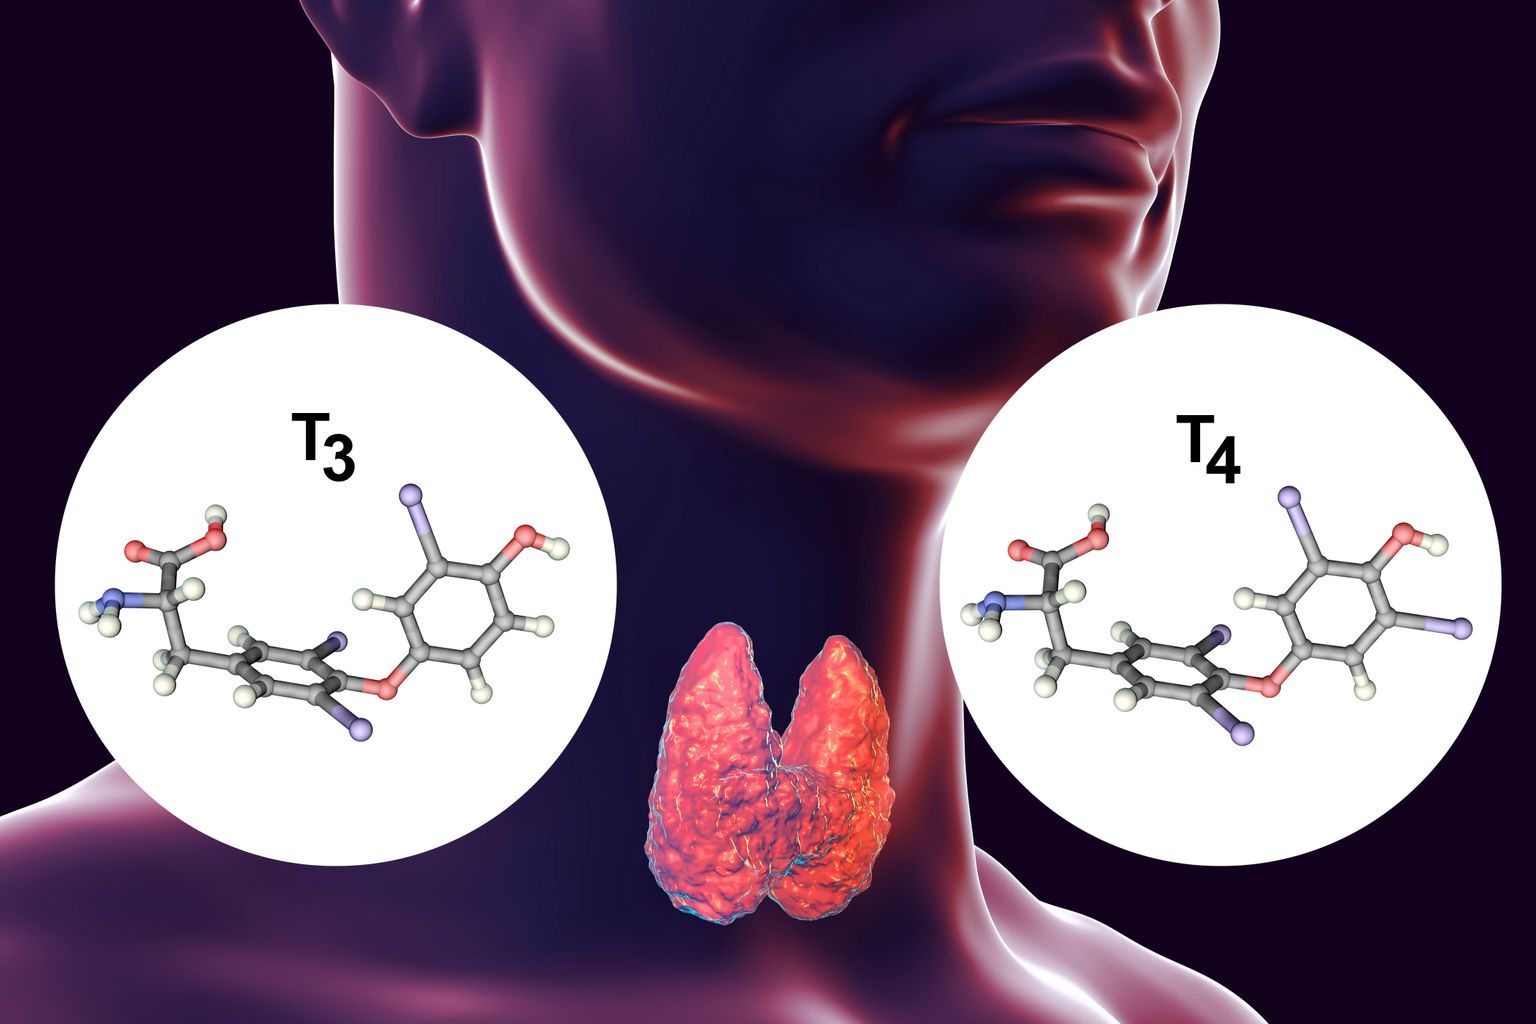 Diagram of the thyroid gland and the hormones T3 and T4